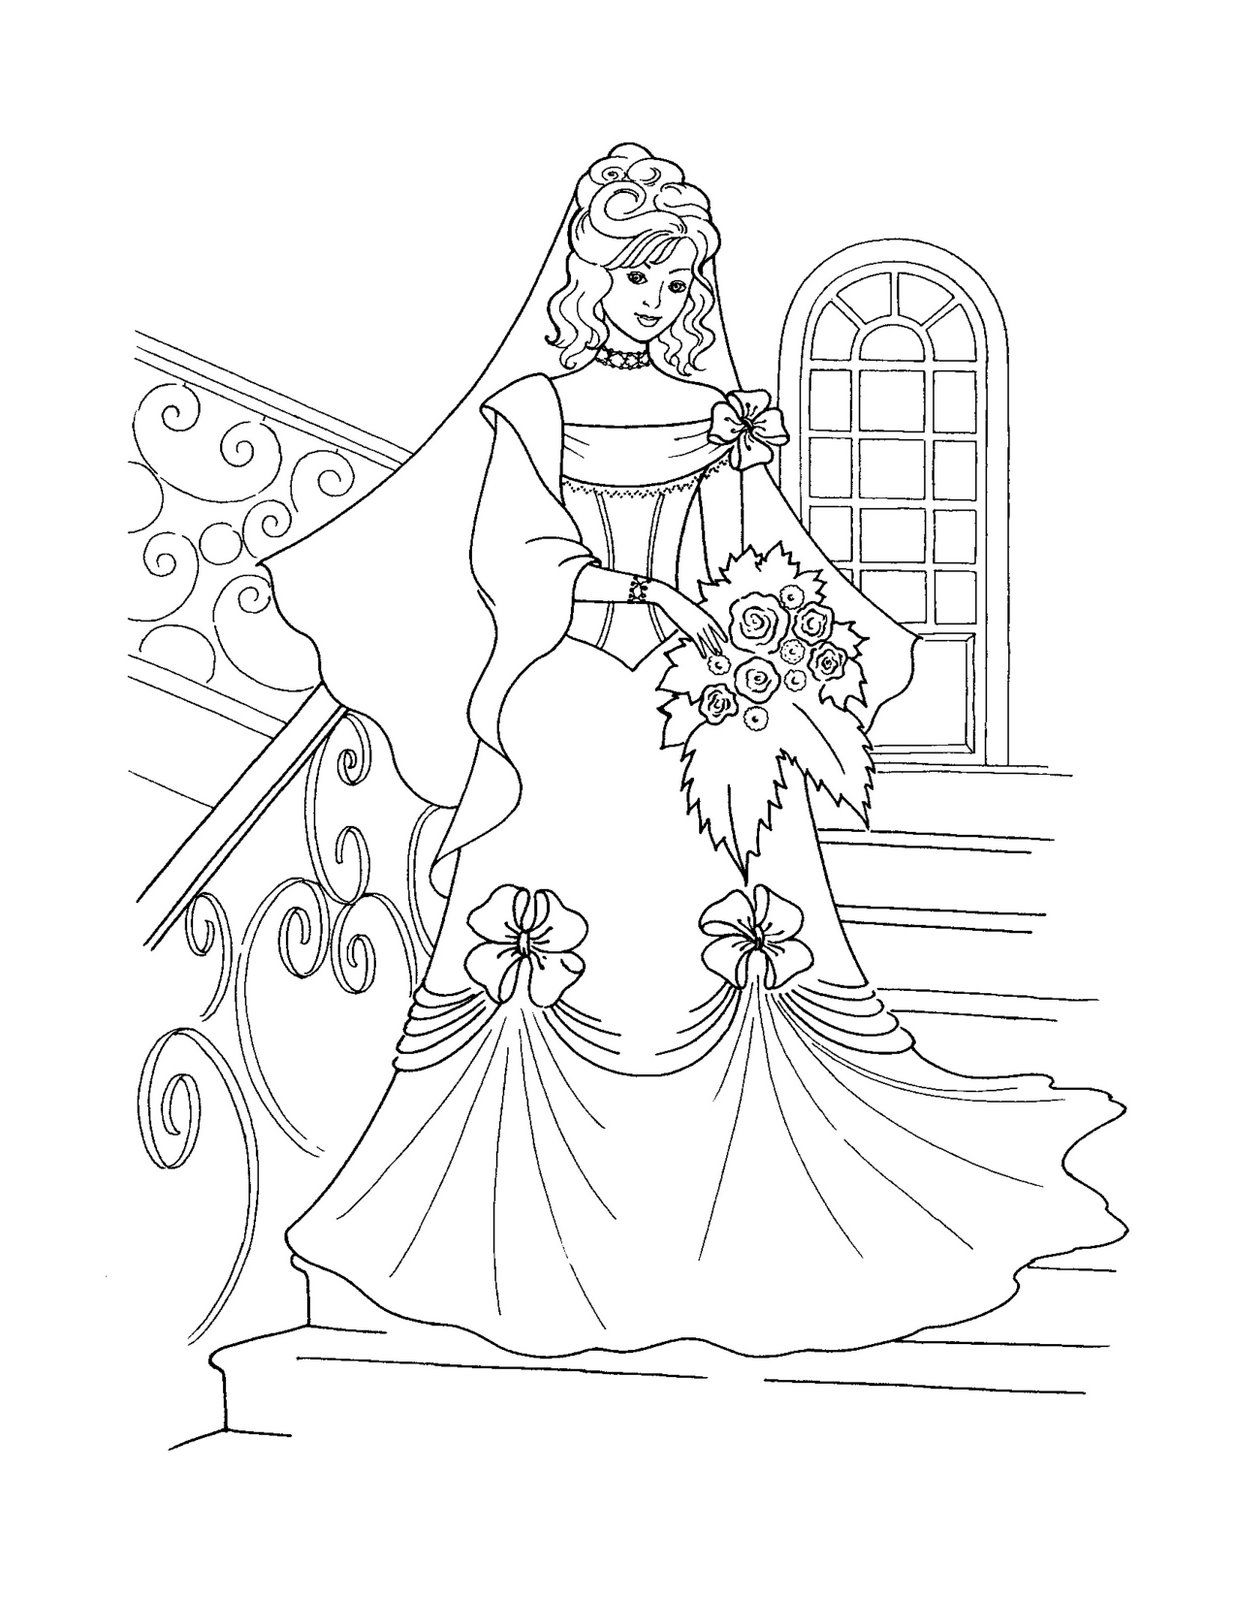 Christmas Coloring Pages Disney Princess - Coloring Page